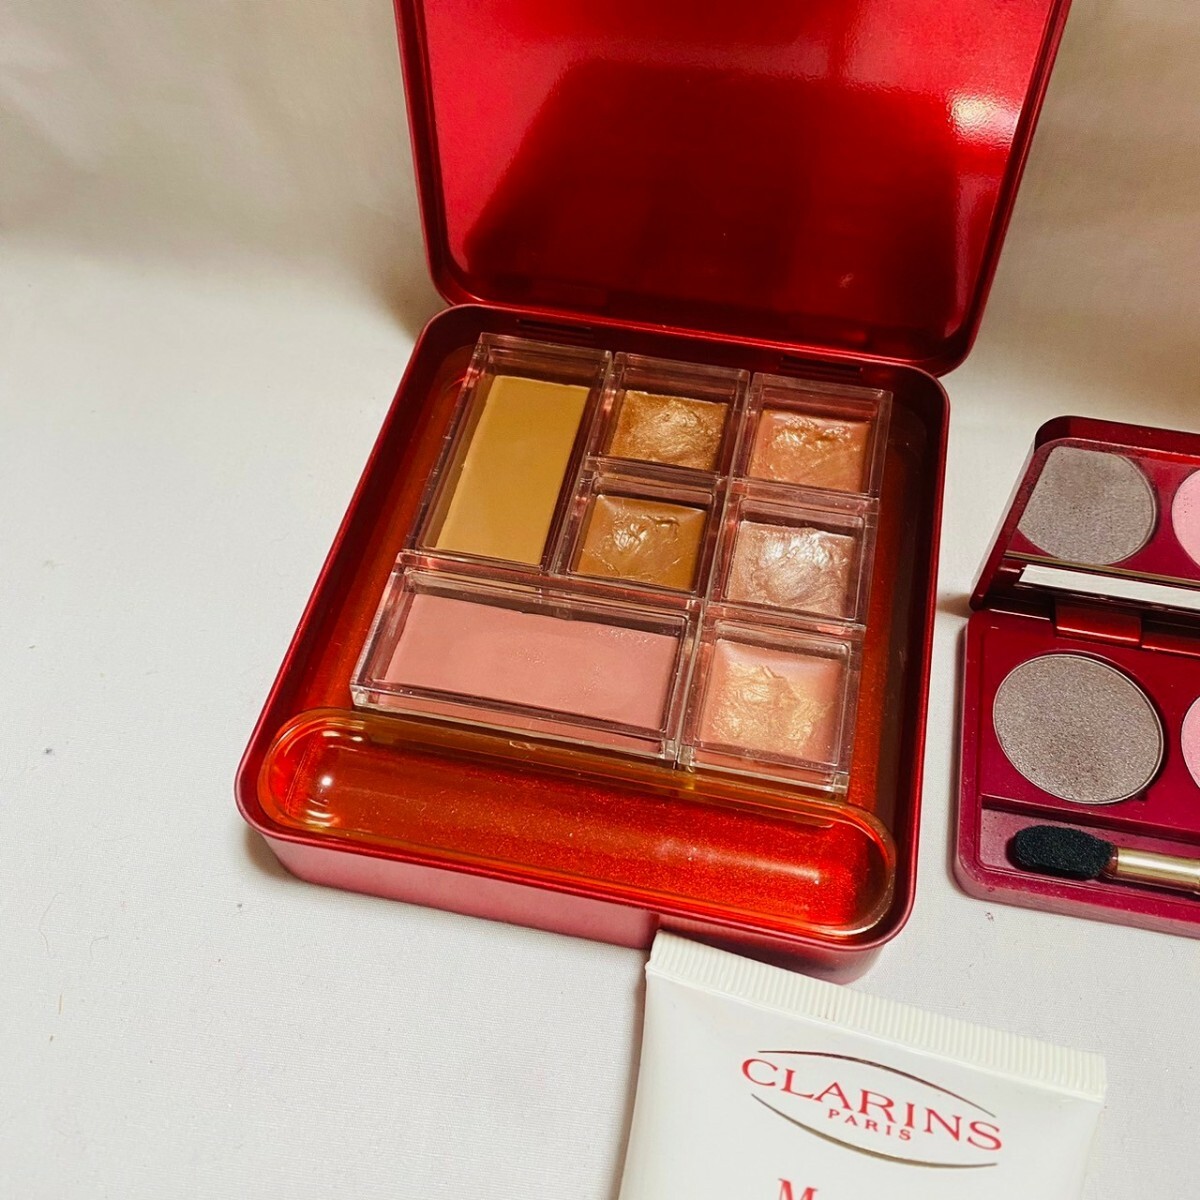 CLARINS cosme 